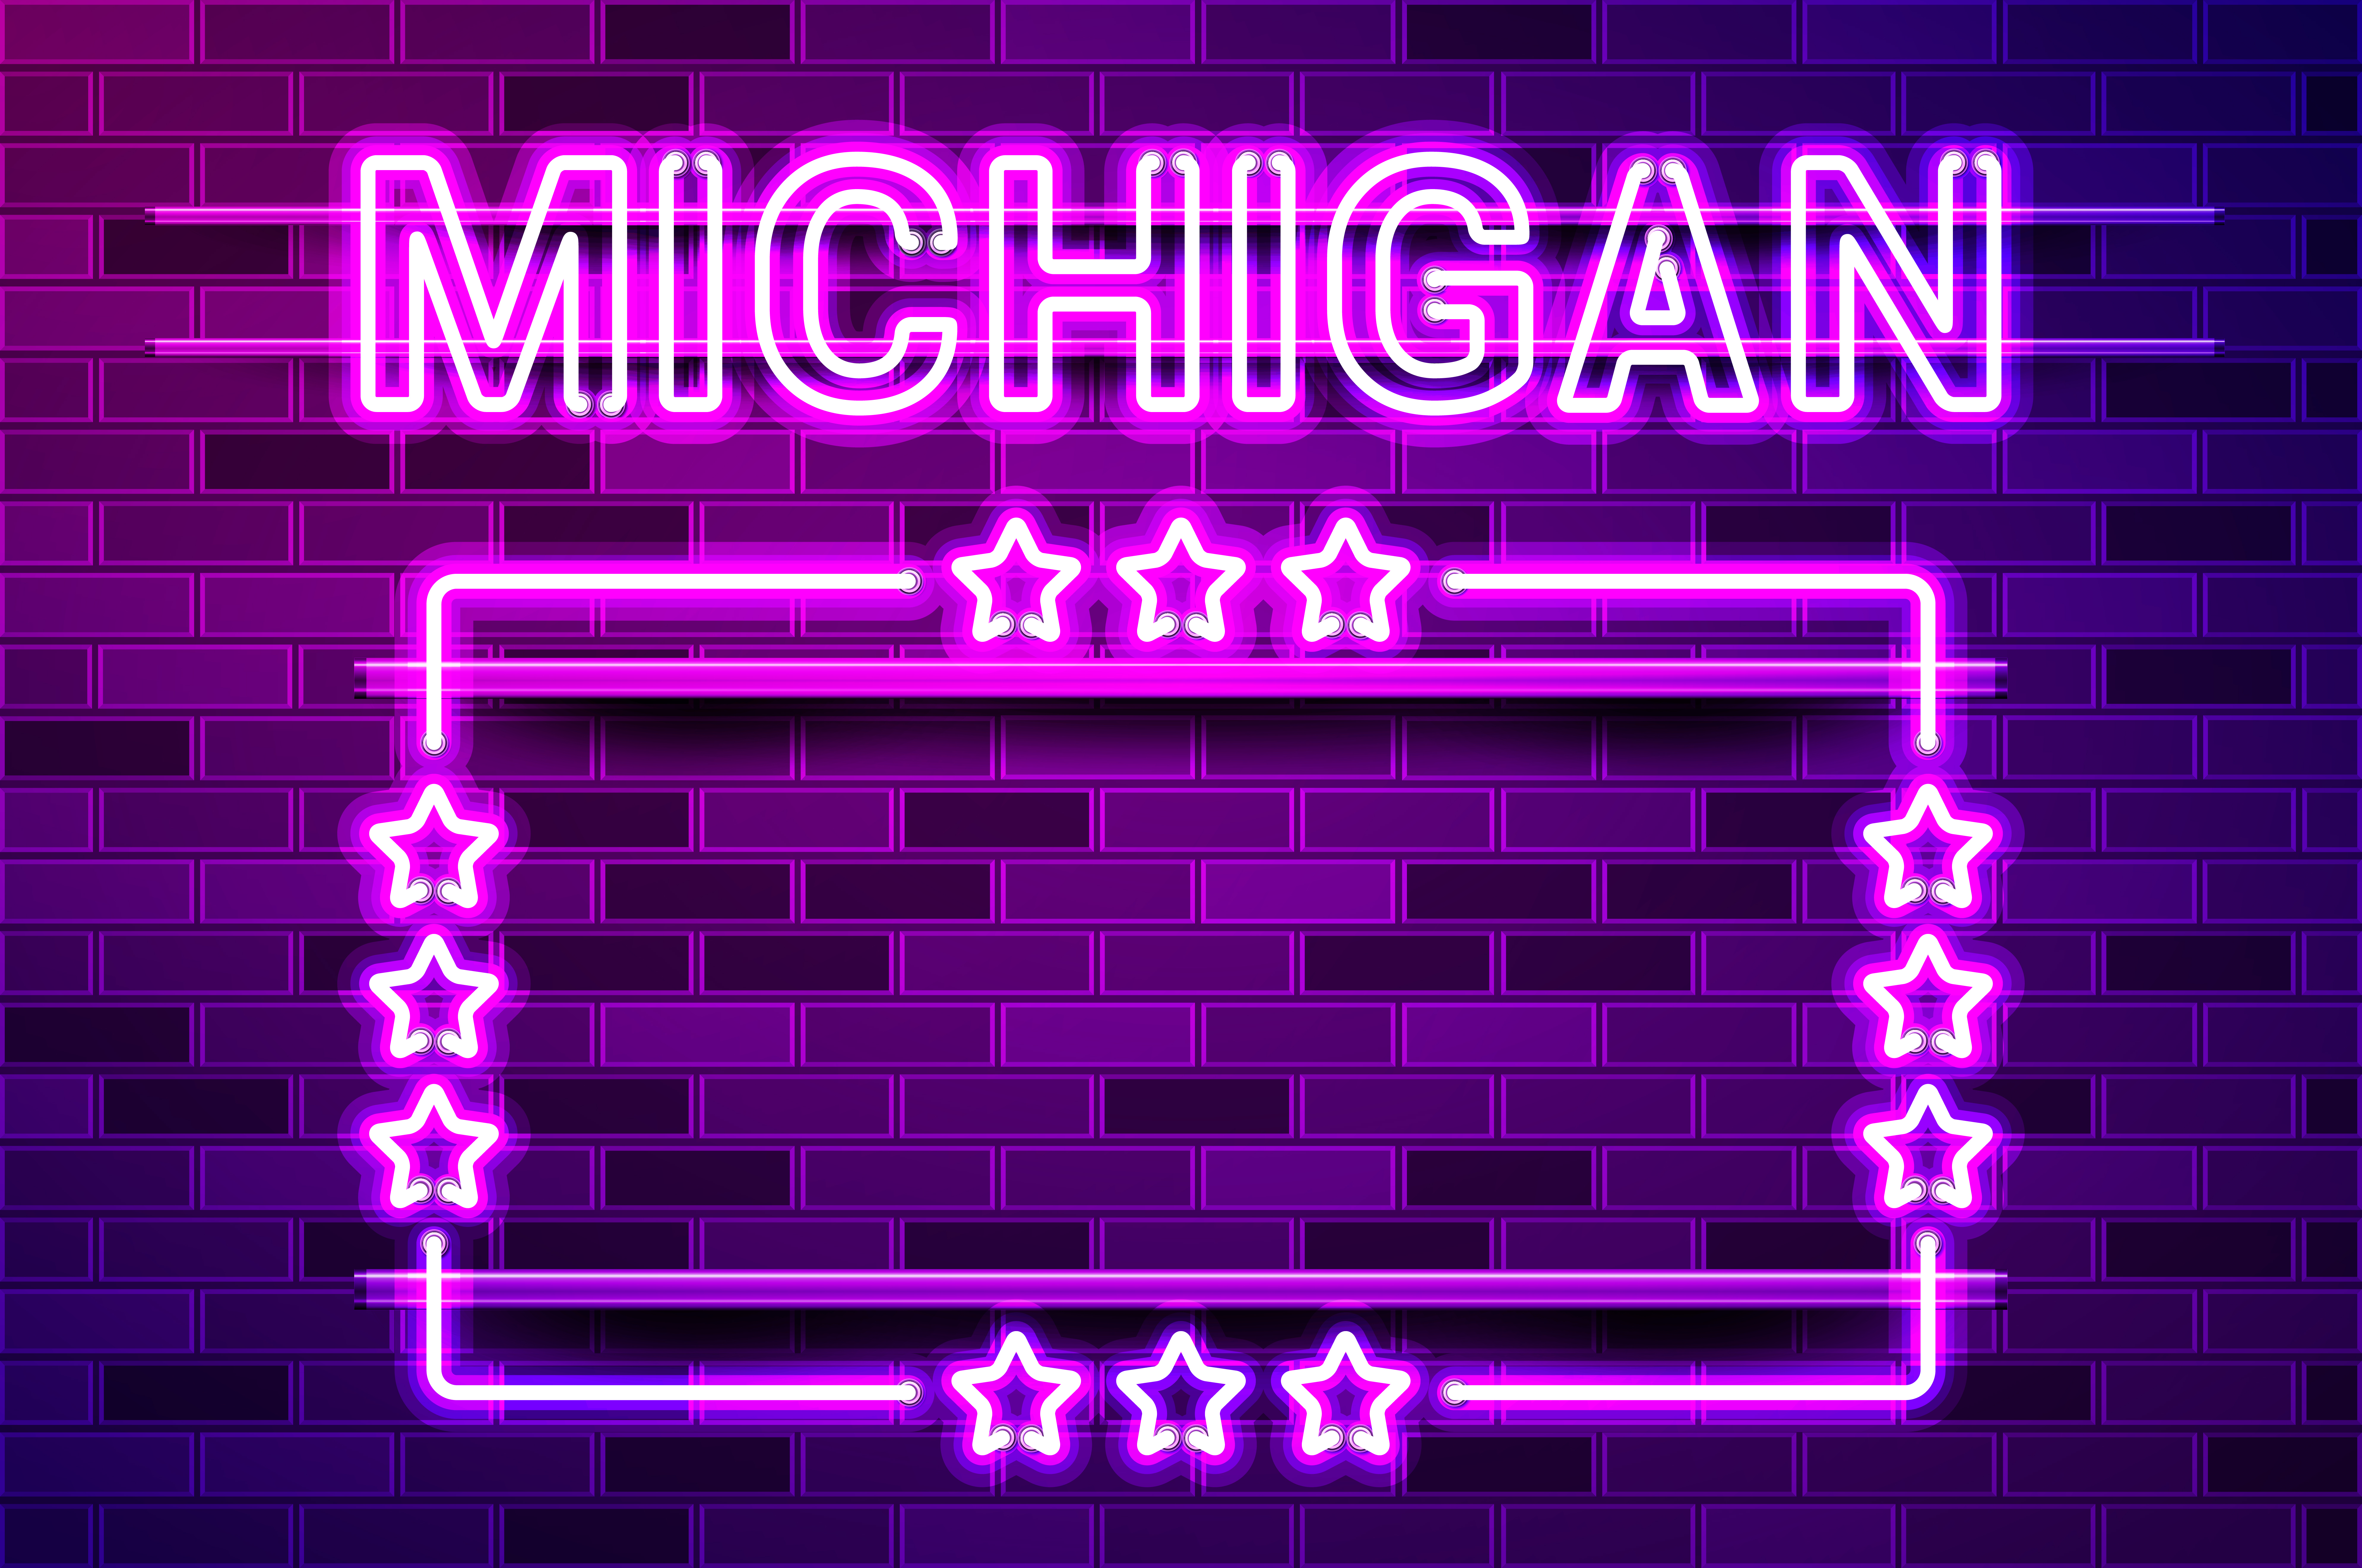 Michigan US State glowing purple neon lettering and a rectangular frame with stars. Realistic vector illustration. Purple brick wall, violet glow, metal holders.. Michigan US State glowing purple neon lettering and a rectangular frame with stars